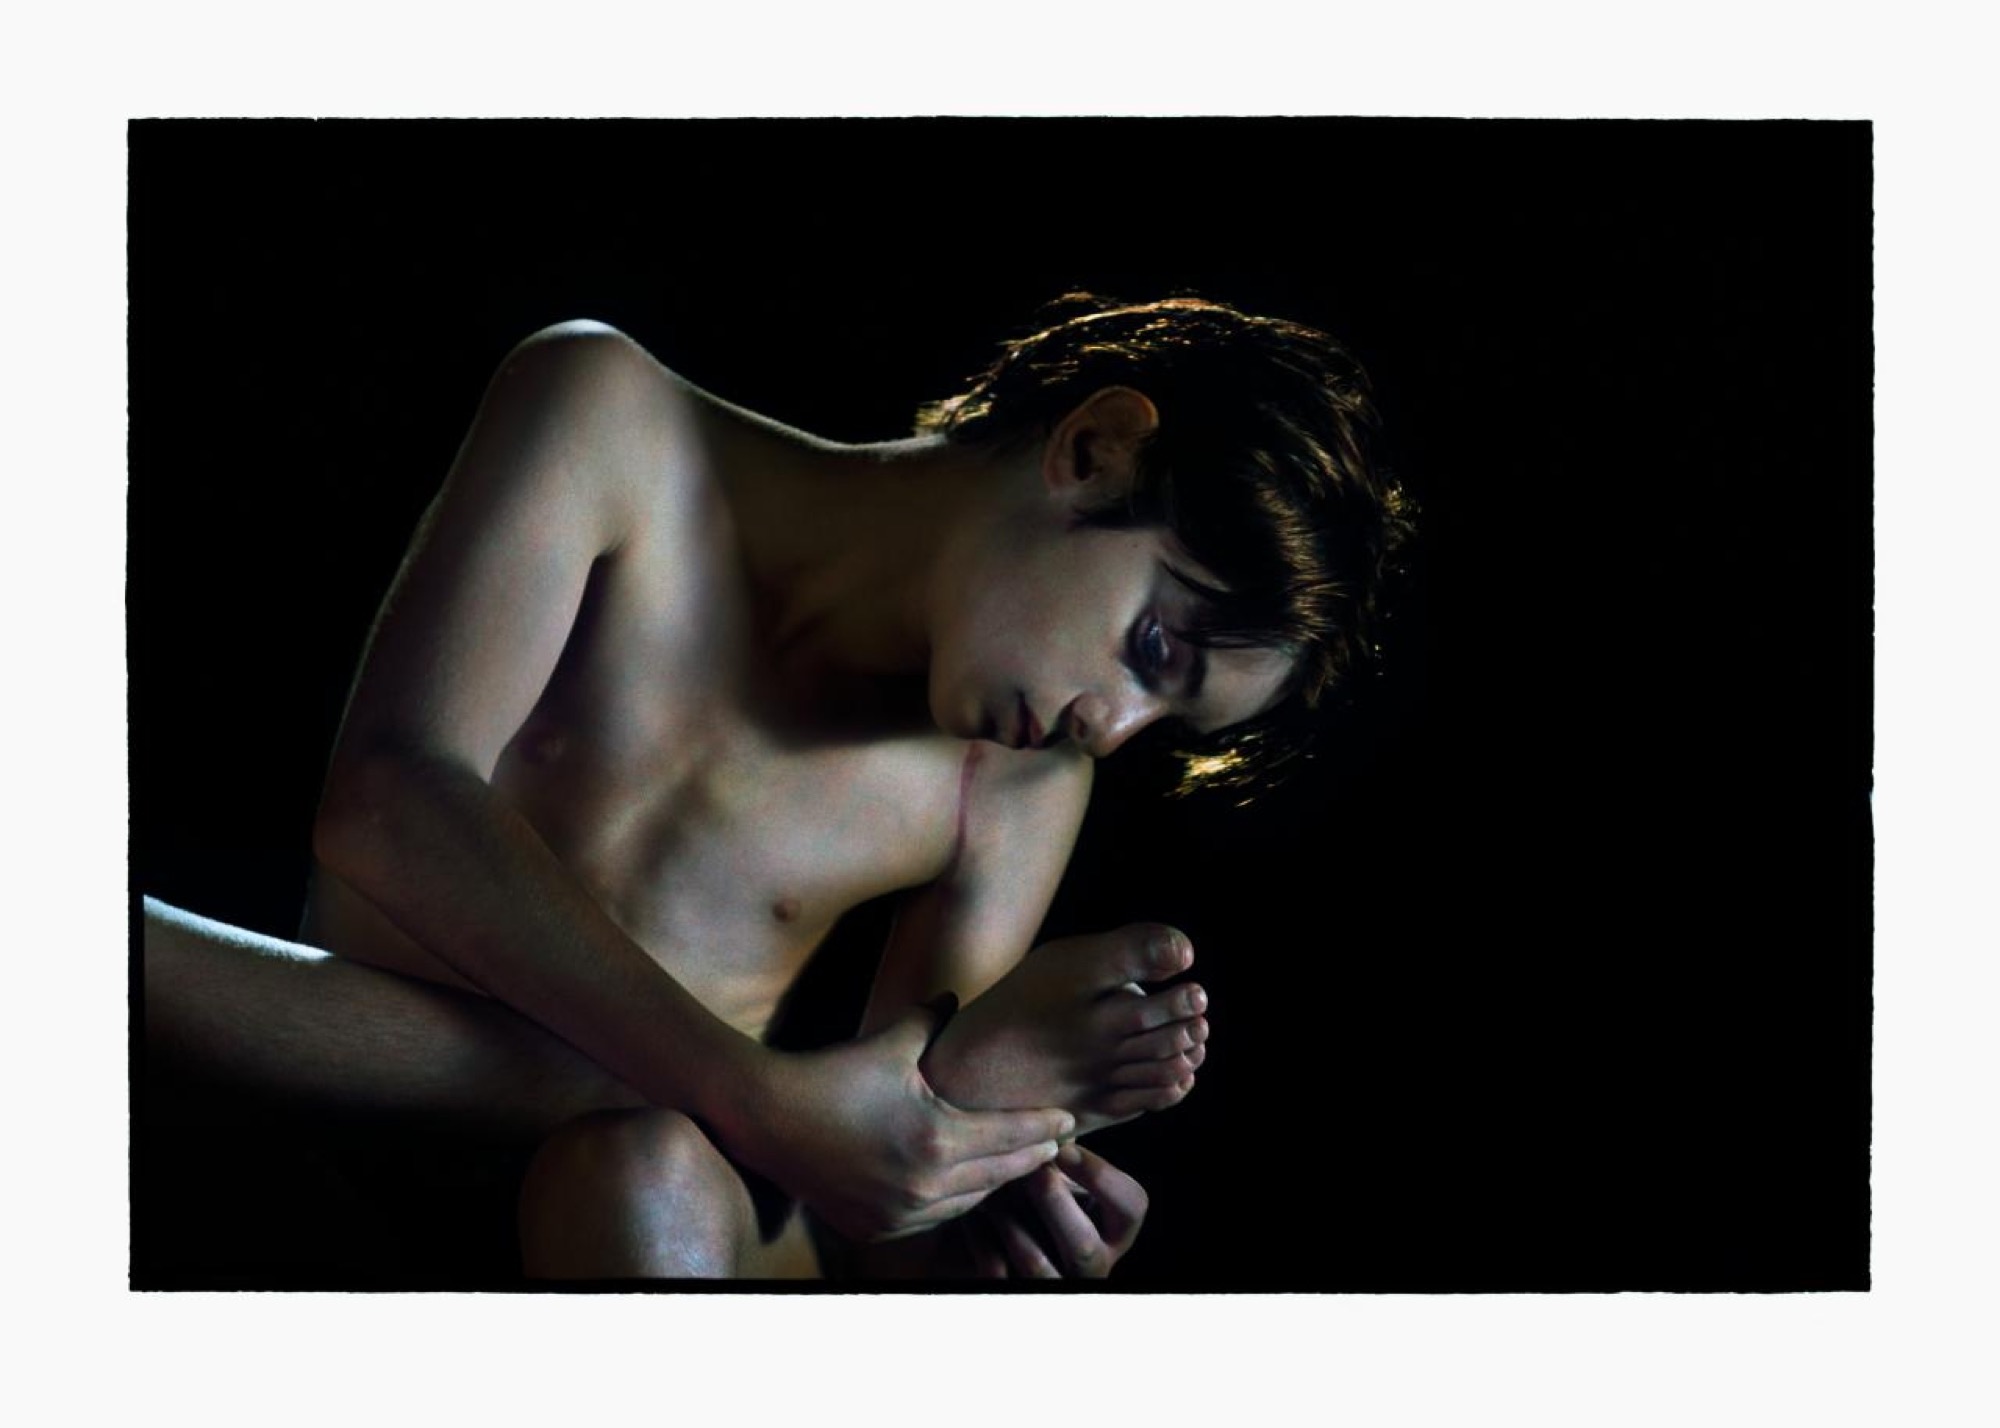 Bill Henson, <em>Untitled</em>, inkjet print, 127.0 x 180.0 cm, ed. 3/5, National Gallery of Victoria, Melbourne, Gift of William Donald Bowness through the Australian Government’s Cultural Gifts Program, 2016.